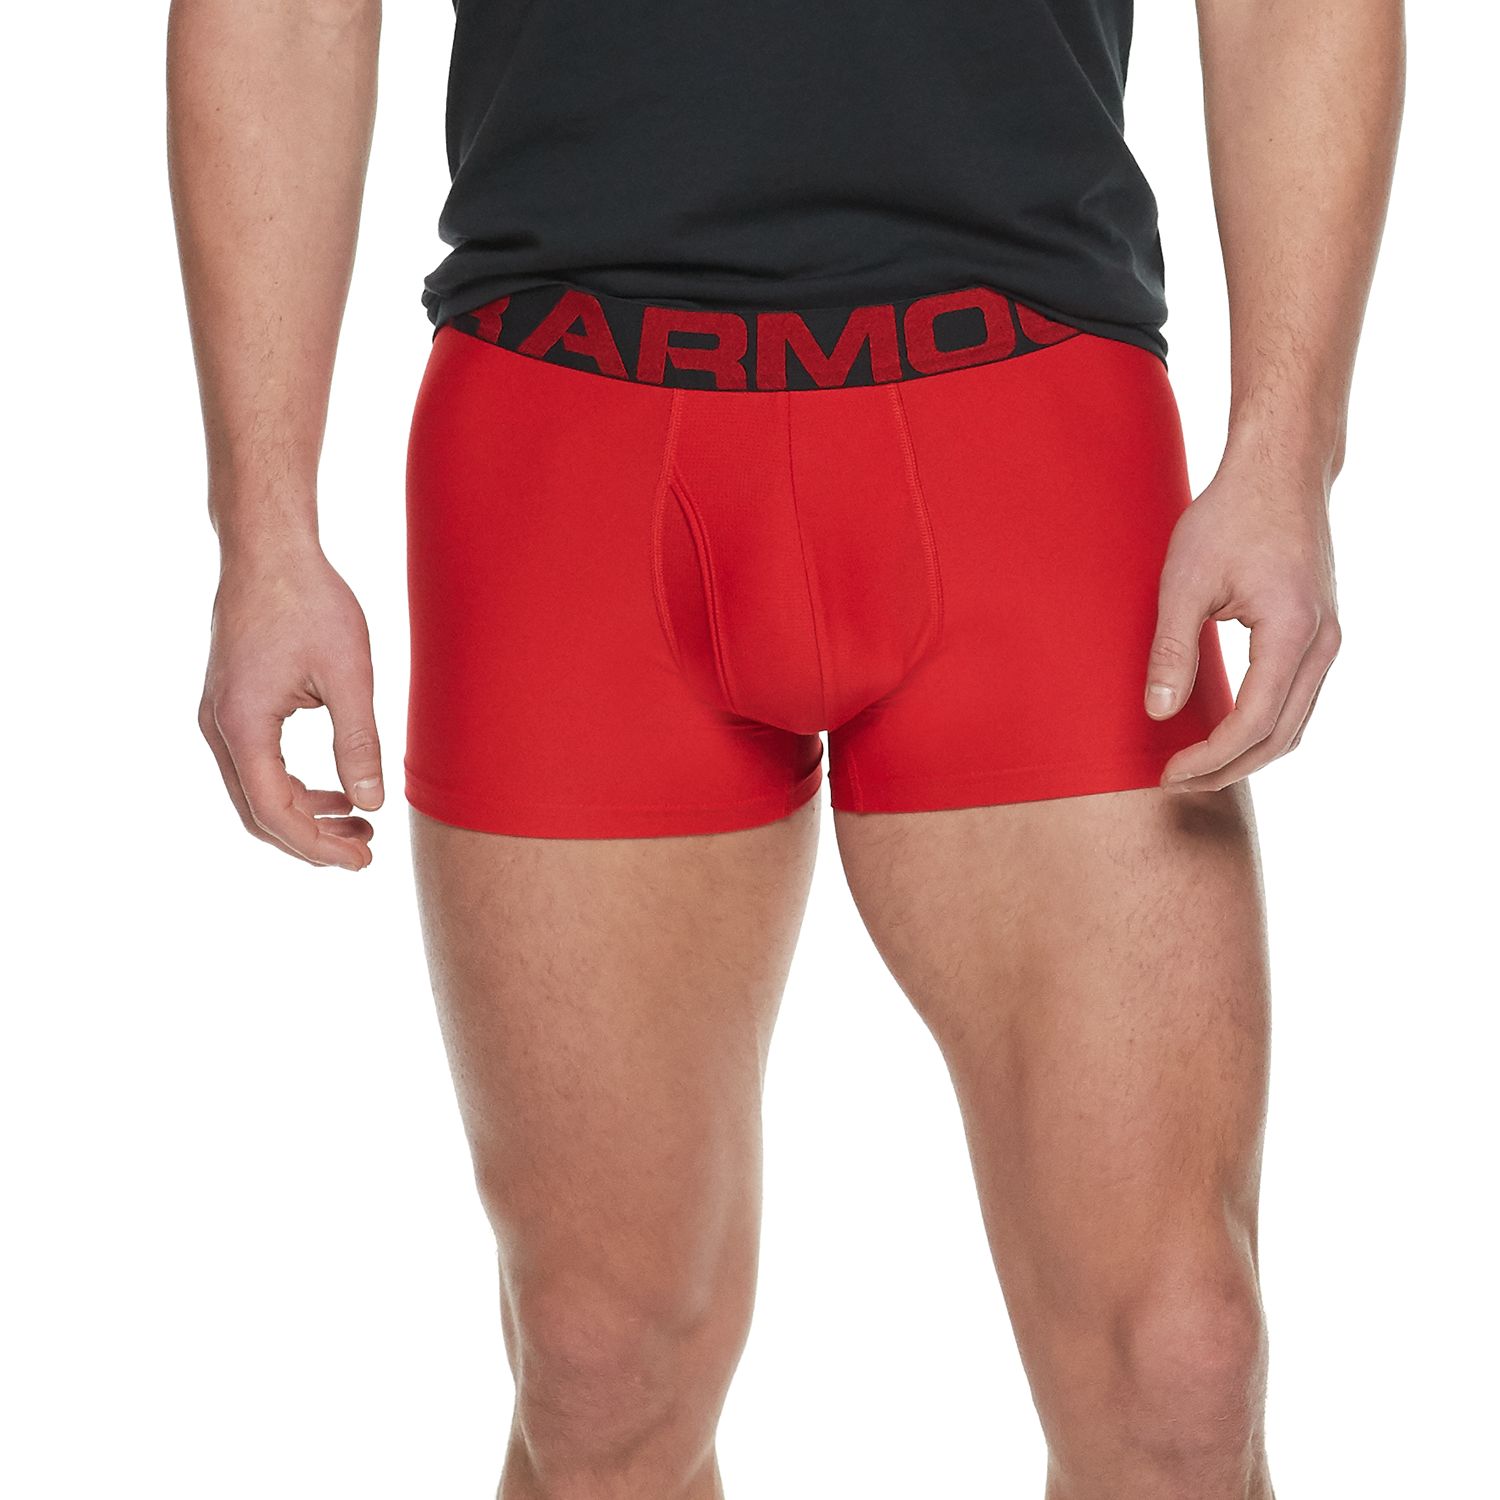 under armour boxers 3 inch 3 pack